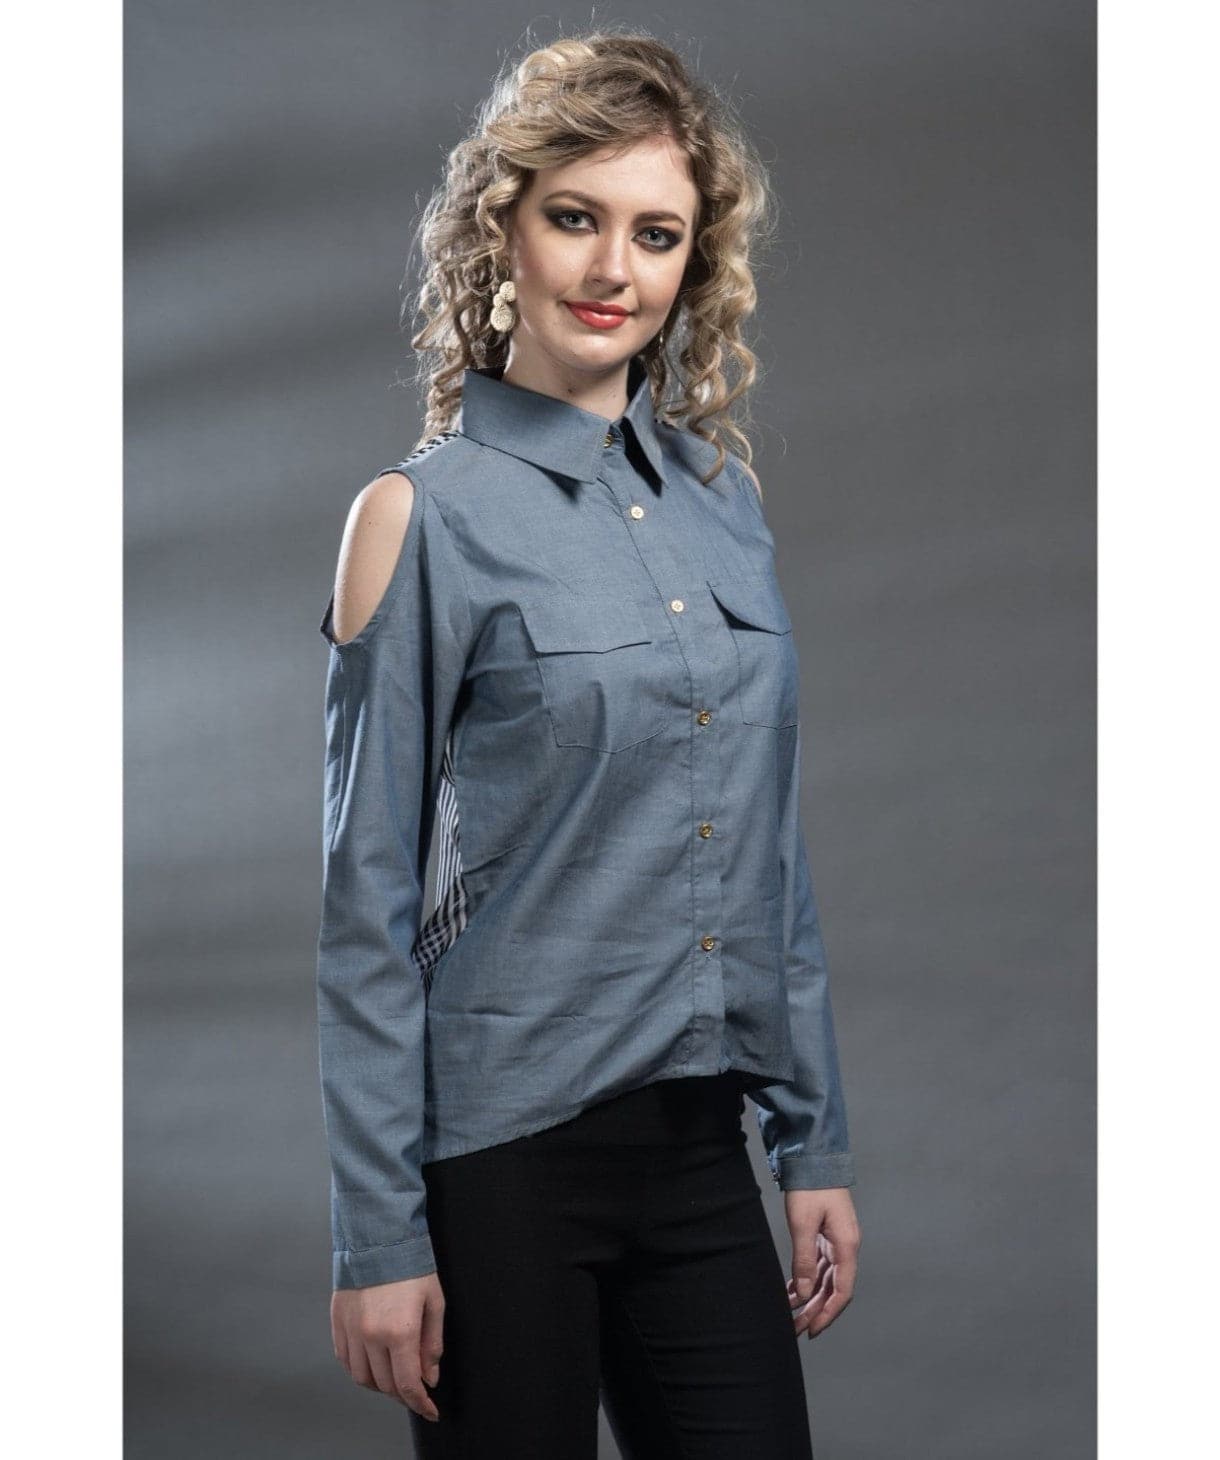 Uptownie X Pearl-Solid Grey Cut-out Shirt - Uptownie